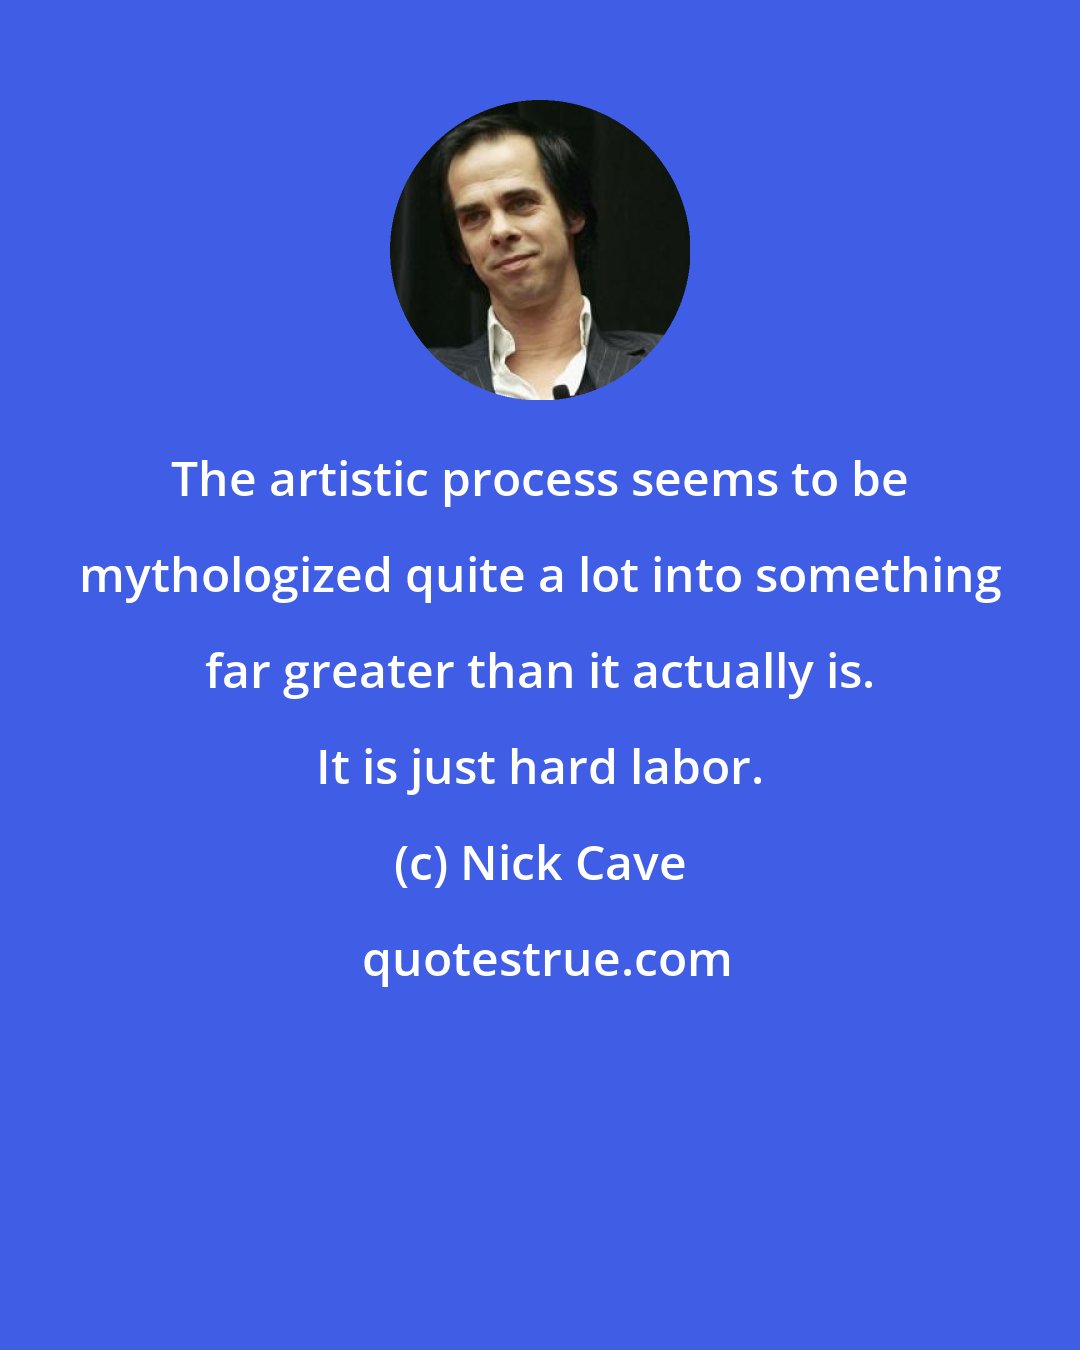 Nick Cave: The artistic process seems to be mythologized quite a lot into something far greater than it actually is. It is just hard labor.